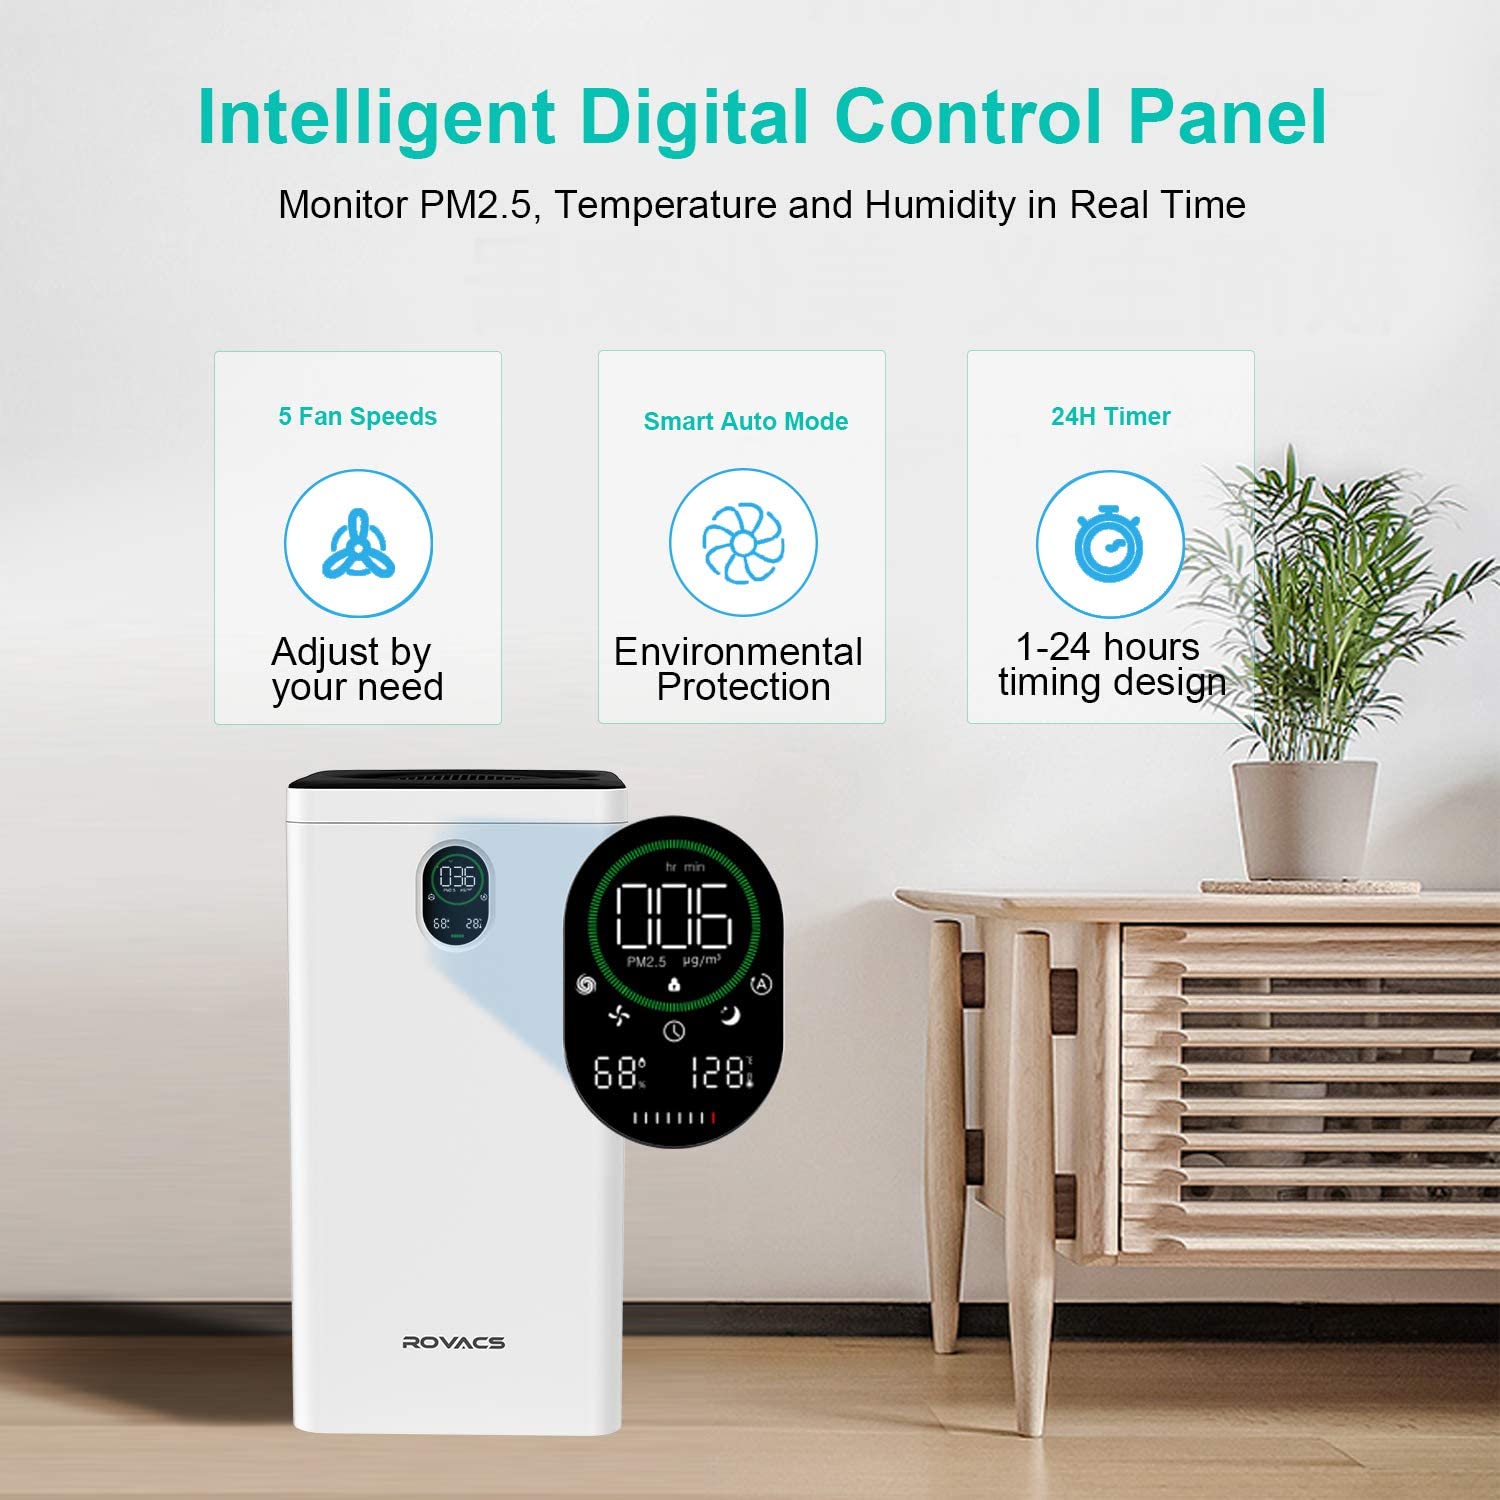 ROVACS Air Purifier RV550, 220 sq ft Coverage, Real HEPA Filter H13, For Smoke, Dust, Odors, Pet Dander, 99.97% Removal, CDAR 520m³/h, Automatic Laser Particle Sensor, Child Lock